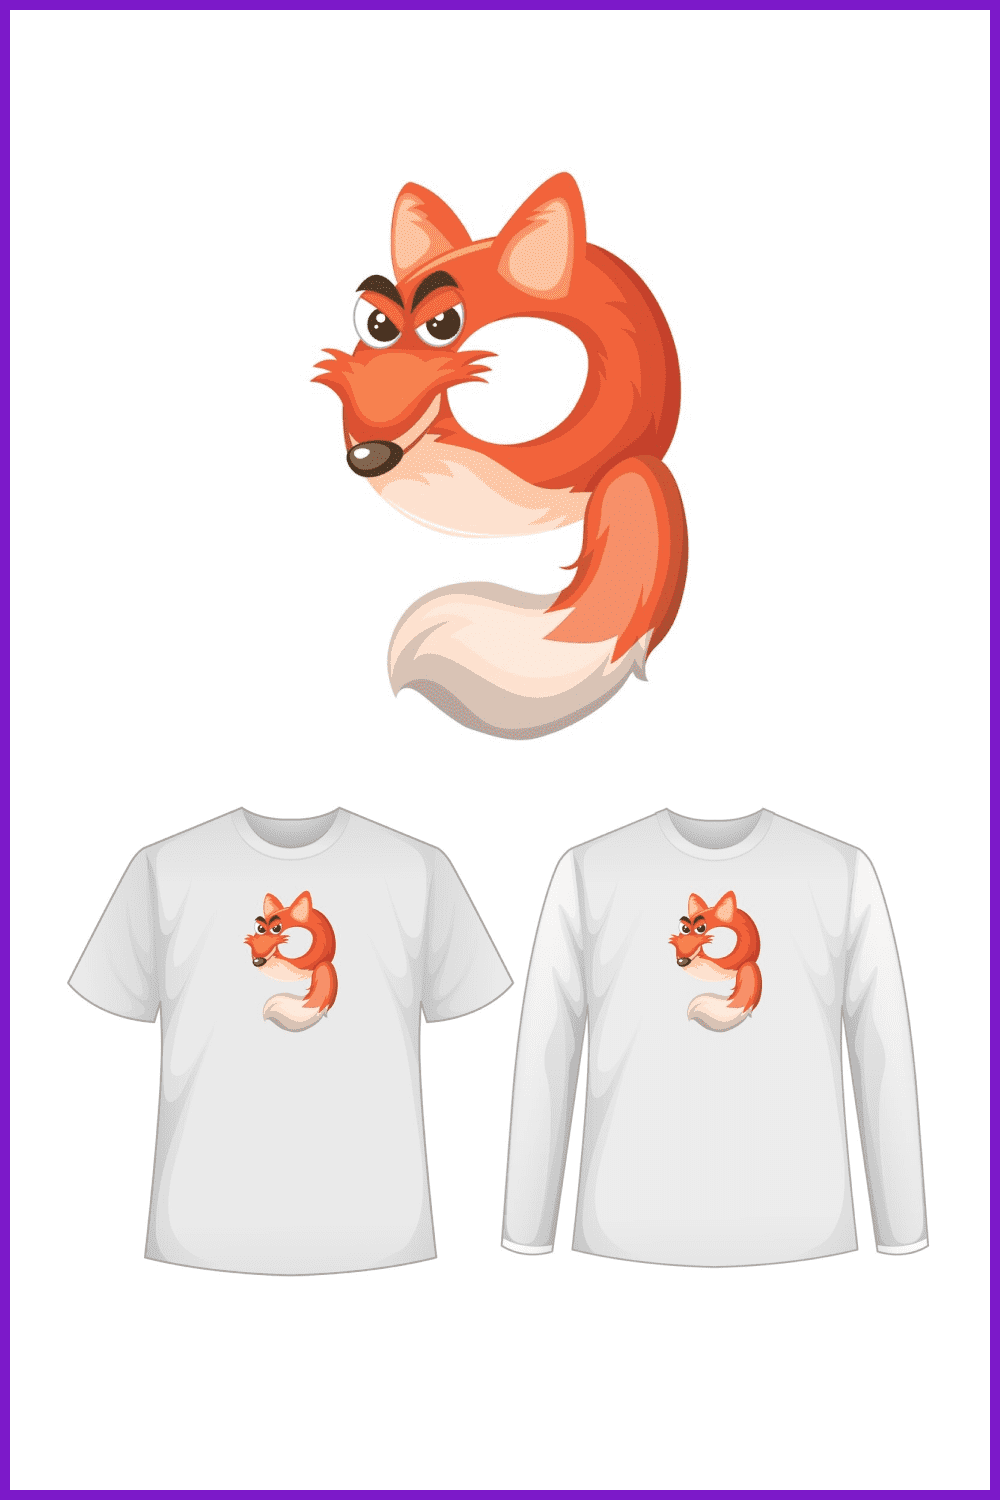 White t-shirts with painted funny orange fox.